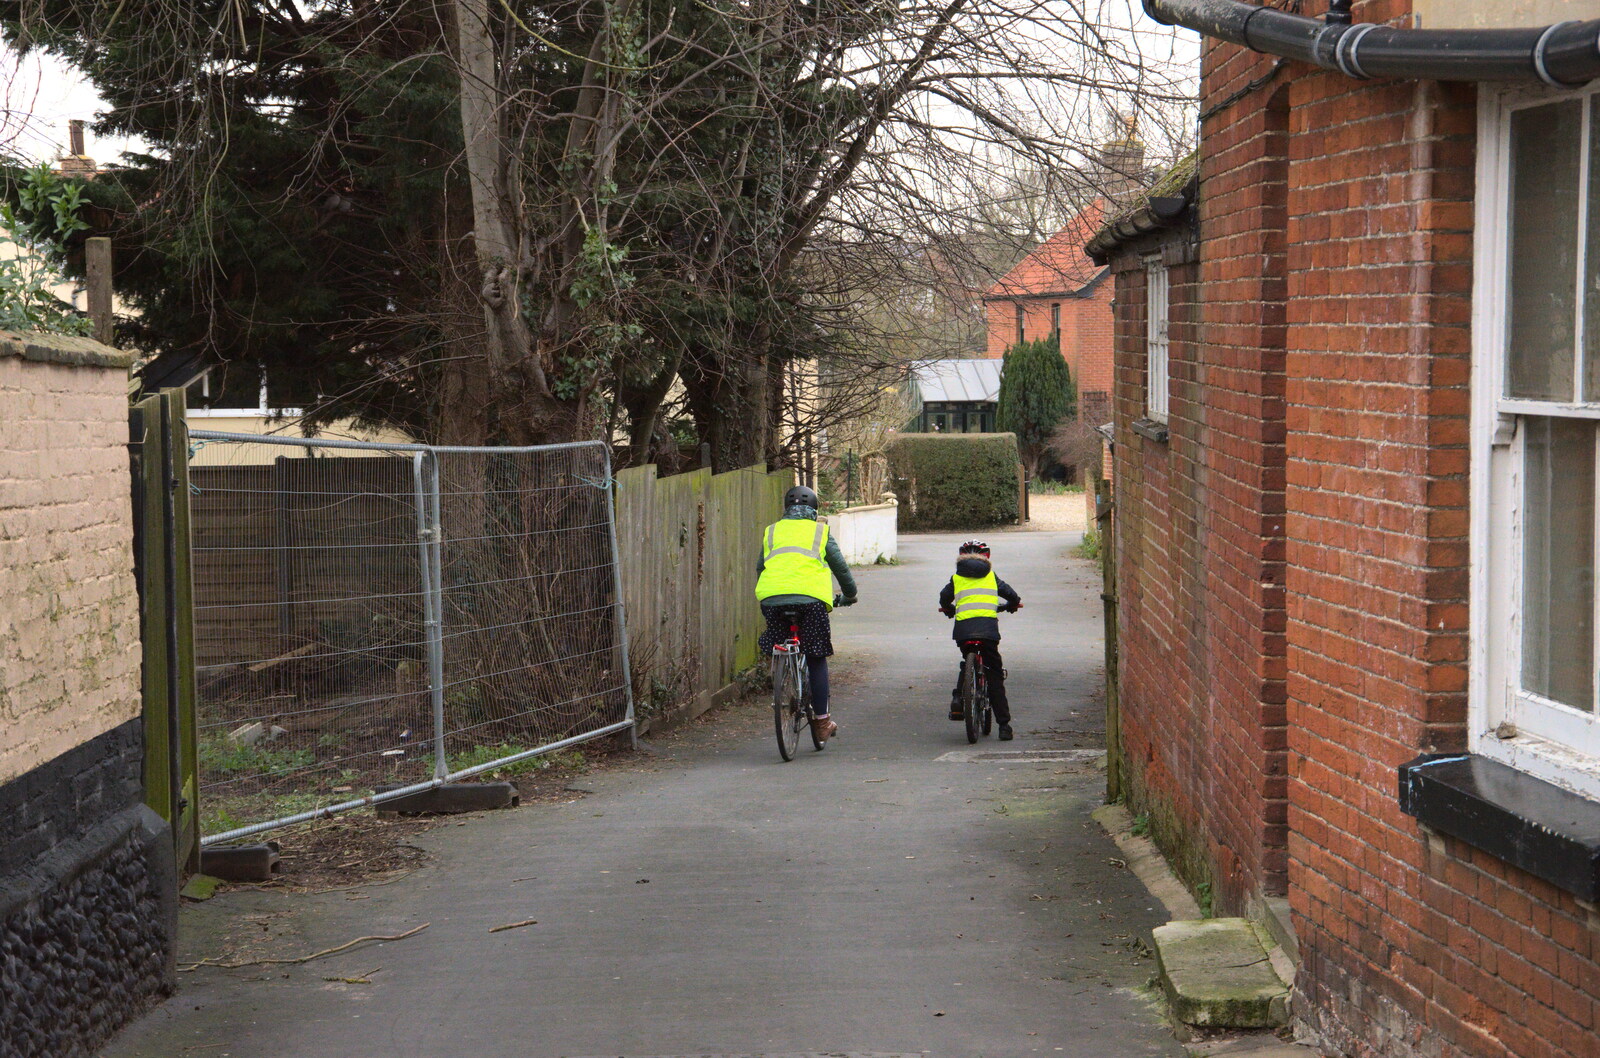 Isobel and Harry ride off down Dove Lane from A Trip to the Blue Shop, Church Street, Eye, Suffolk - 2nd February 2021